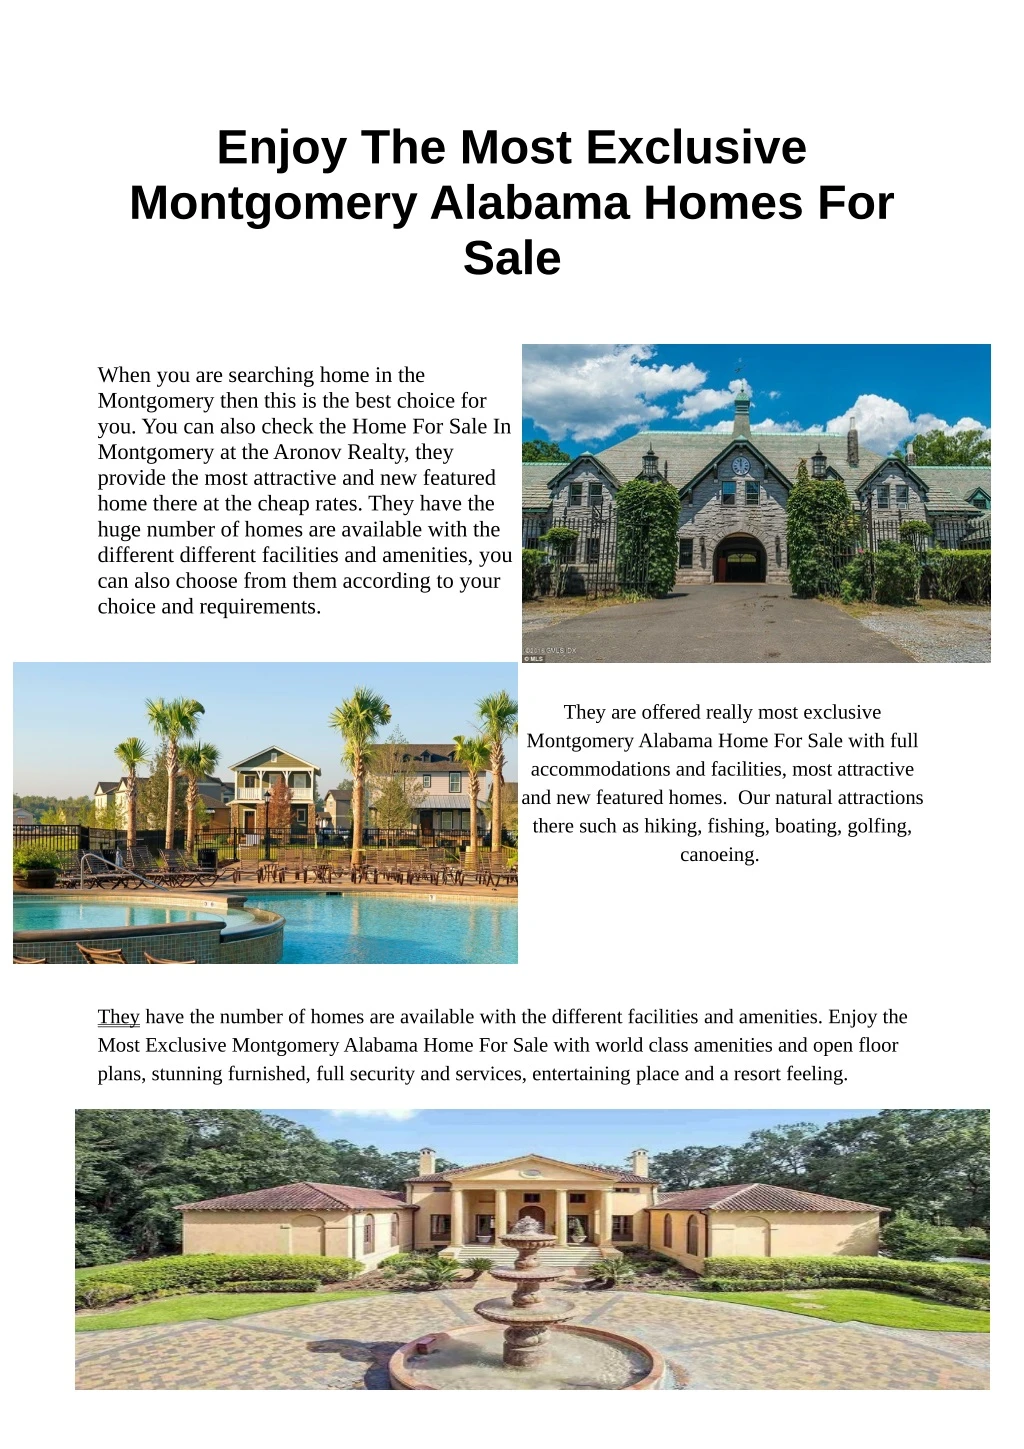 enjoy the most exclusive montgomery alabama homes